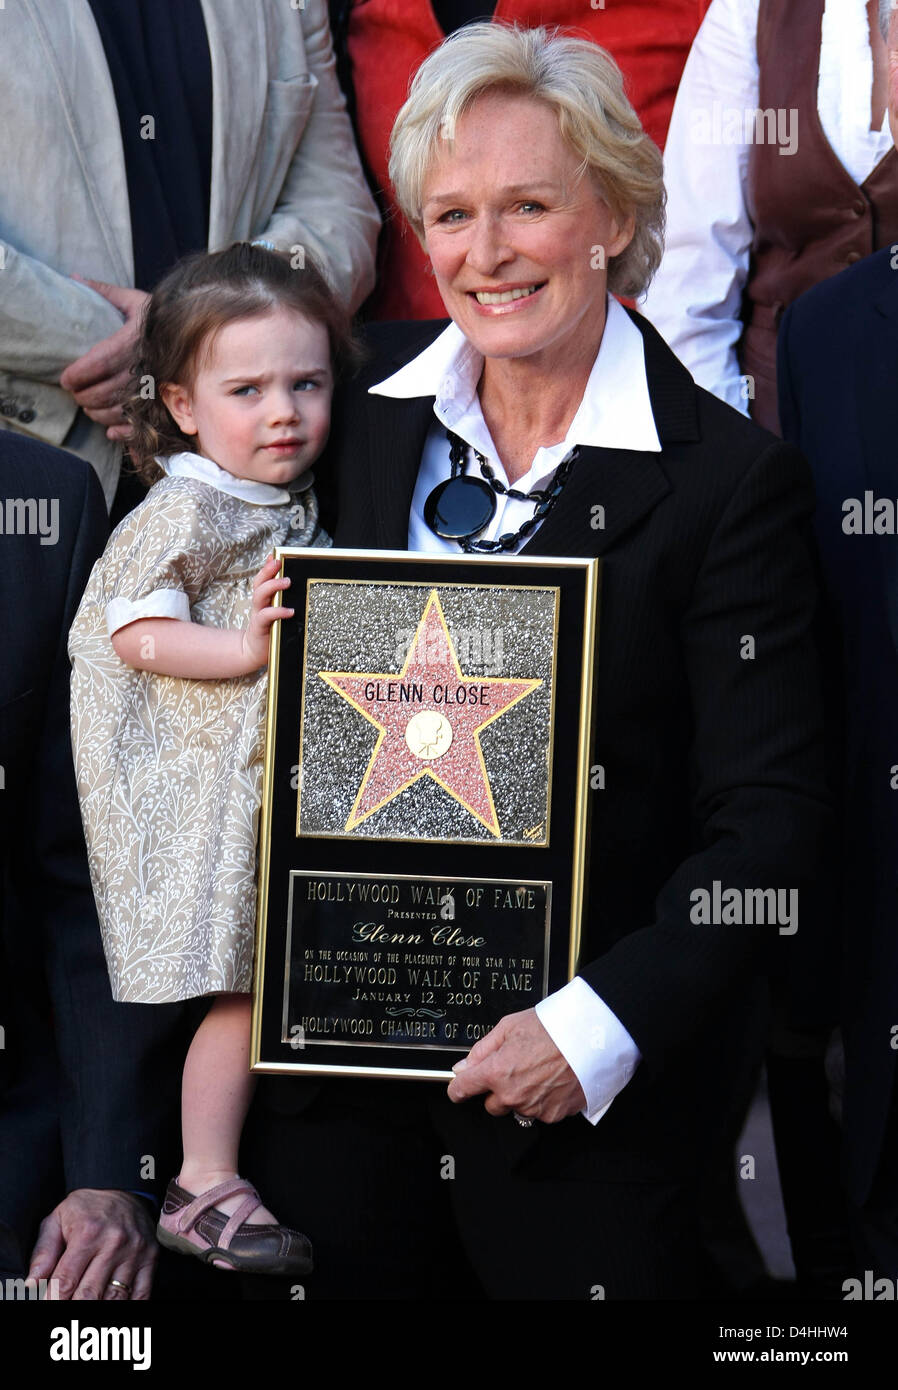 Actress Glenn Close and her granddaughter Lucy Shaw celebrate her newly received star on the Hollywood Walk of Fame in Los Angeles, USA, 12 January 2009. Photo: Hubert Boesl Stock Photo